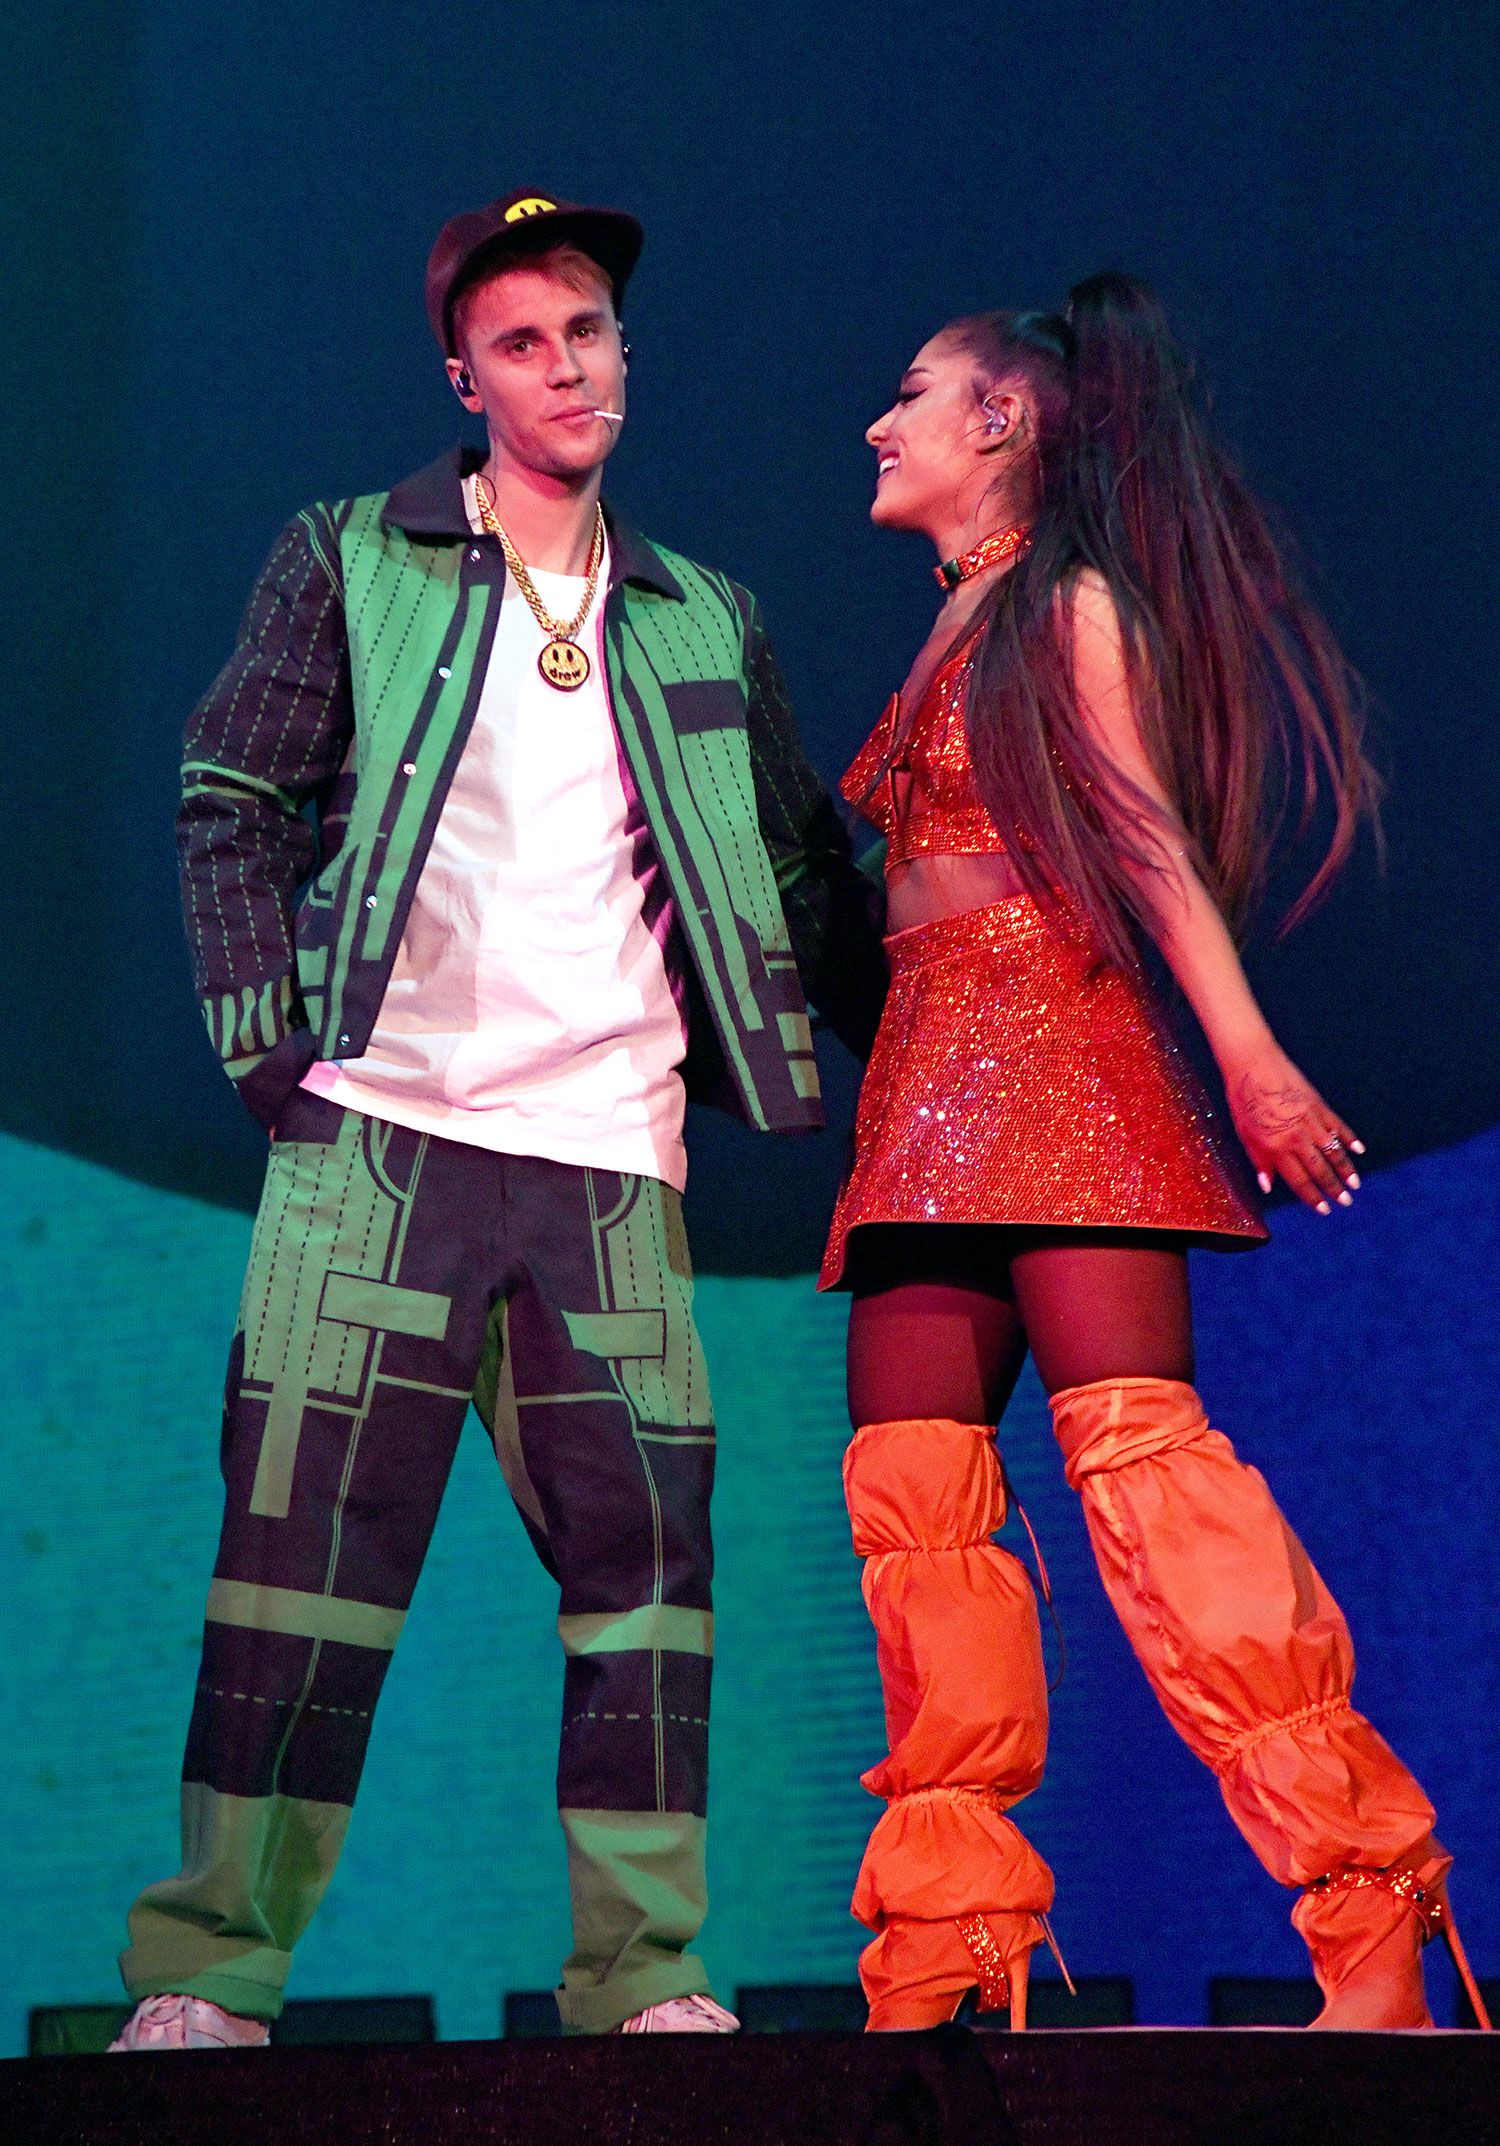 Watch Justin Bieber Perform With Ariana Grande at Coachella and Do First Concert in Years